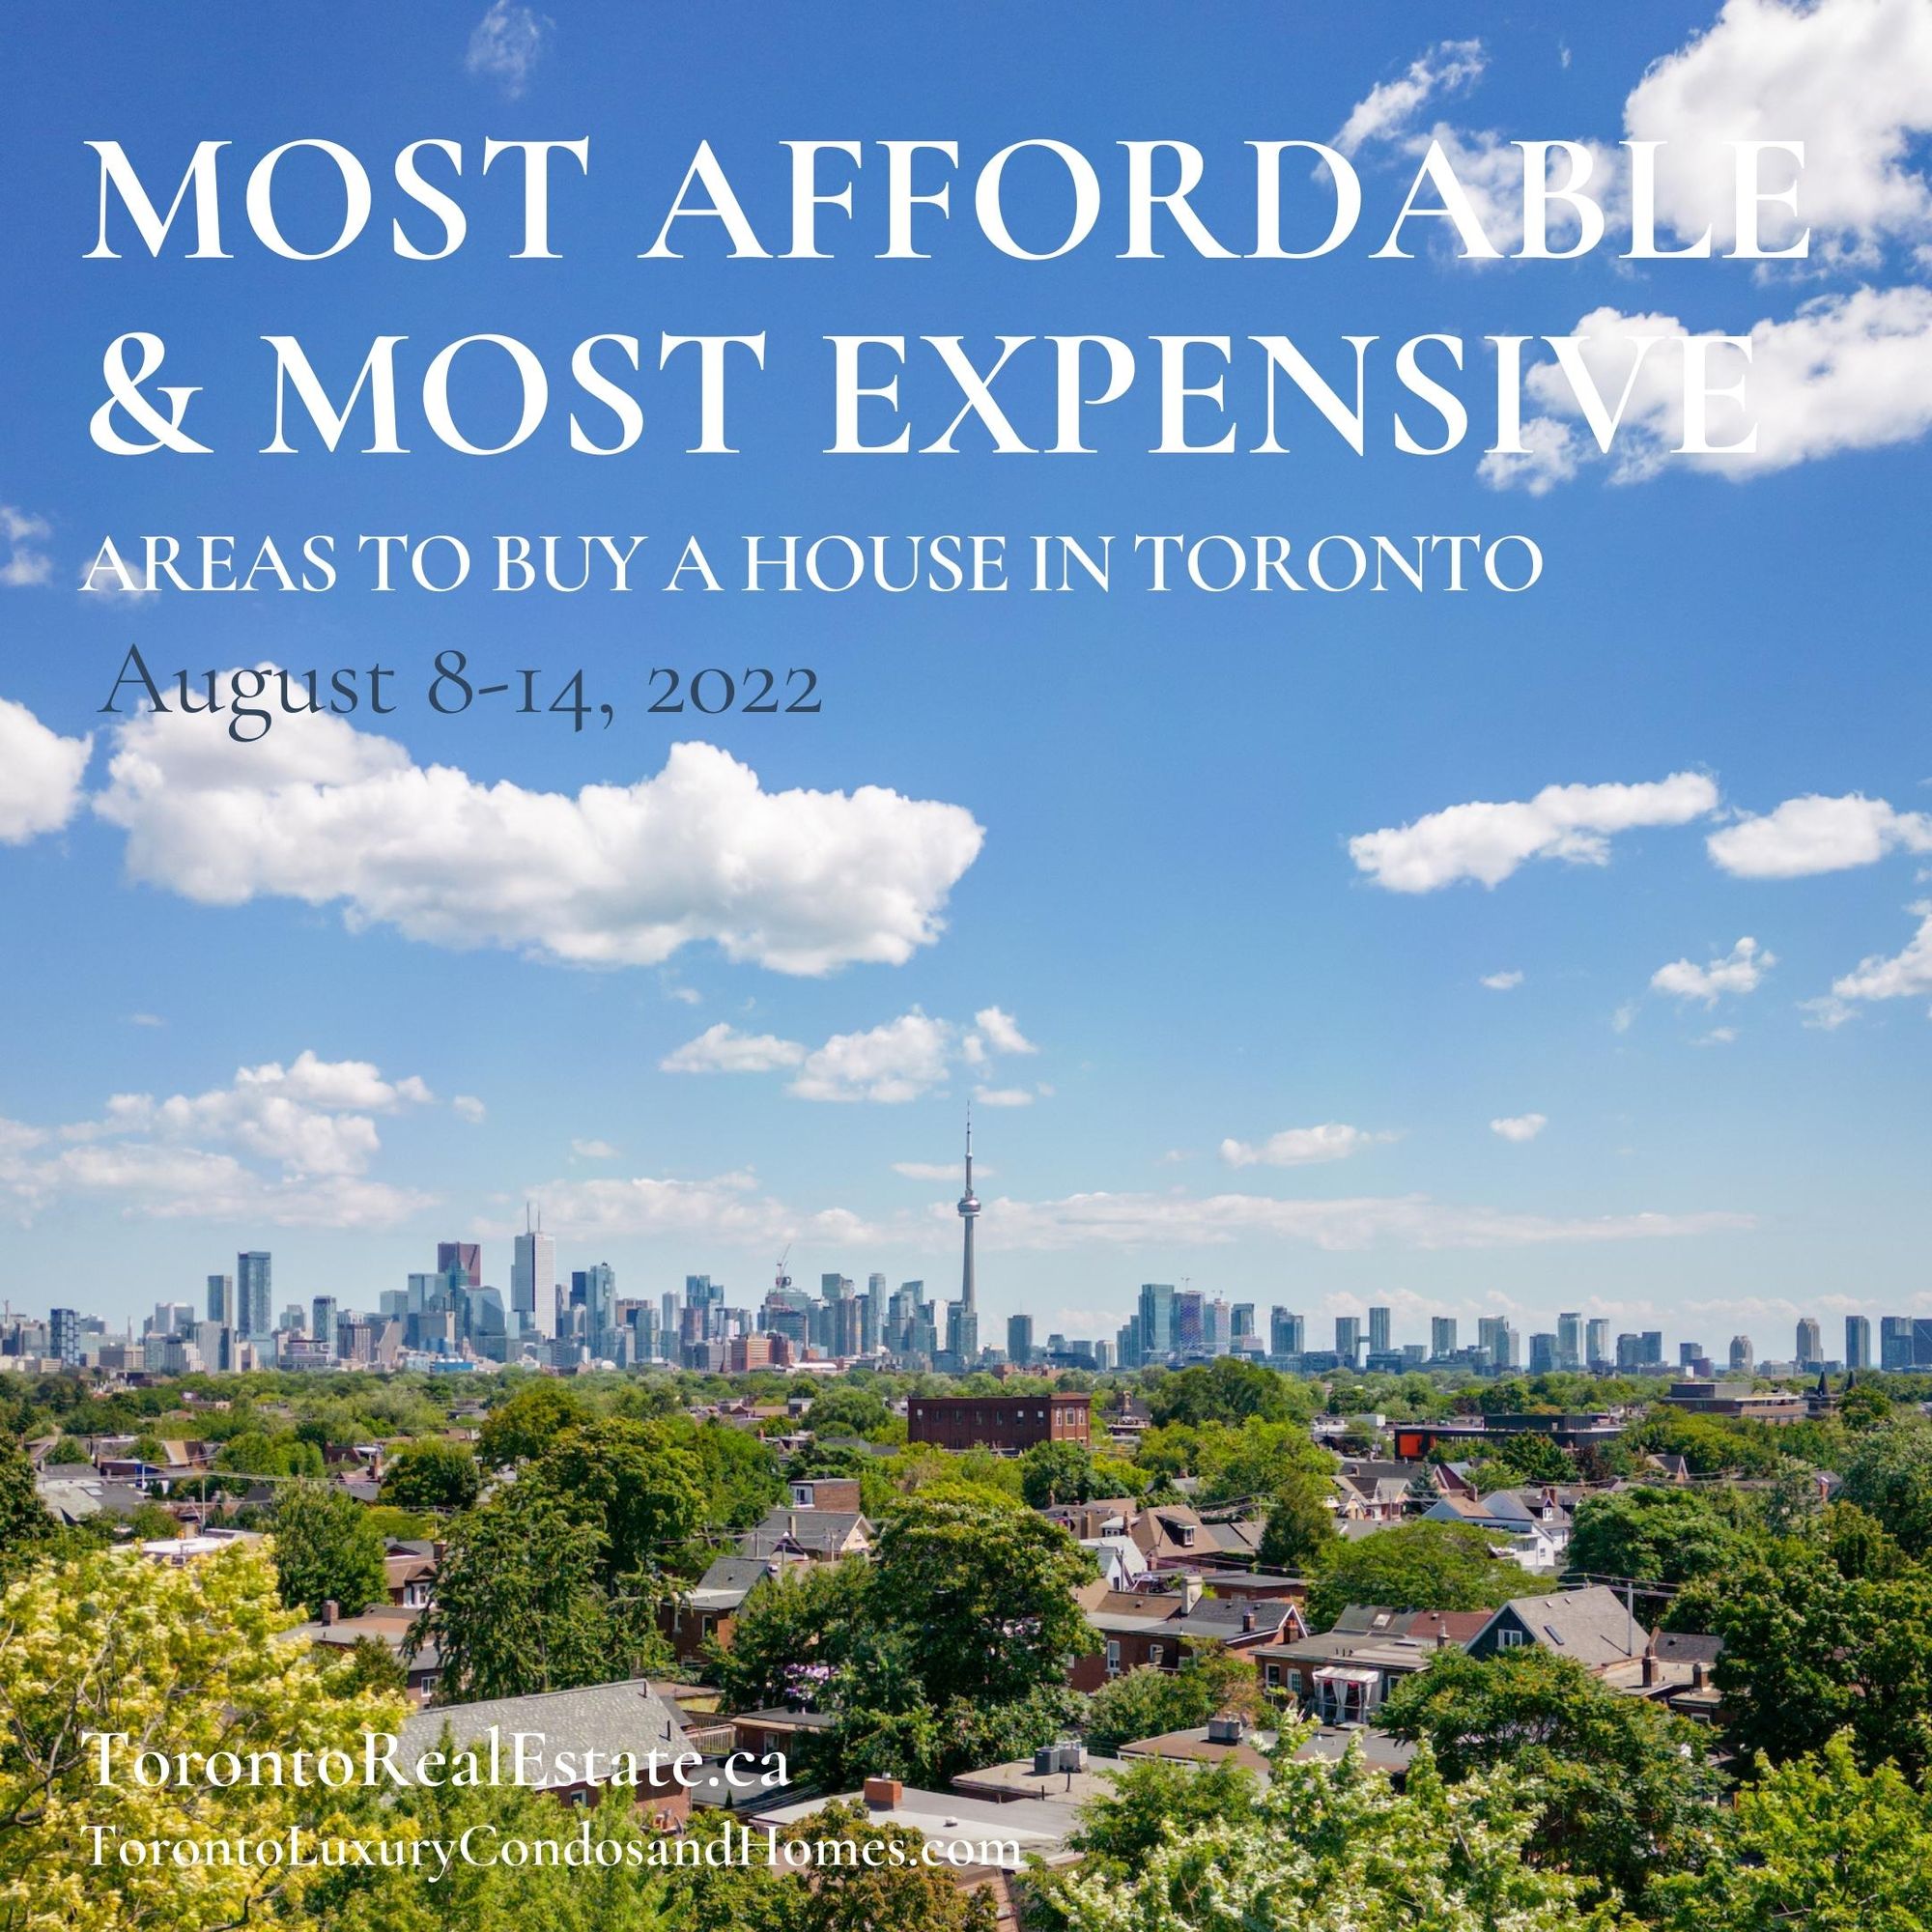 Most Affordable & Most Expensive Areas to Buy a House in Toronto | August 8-14, 2022